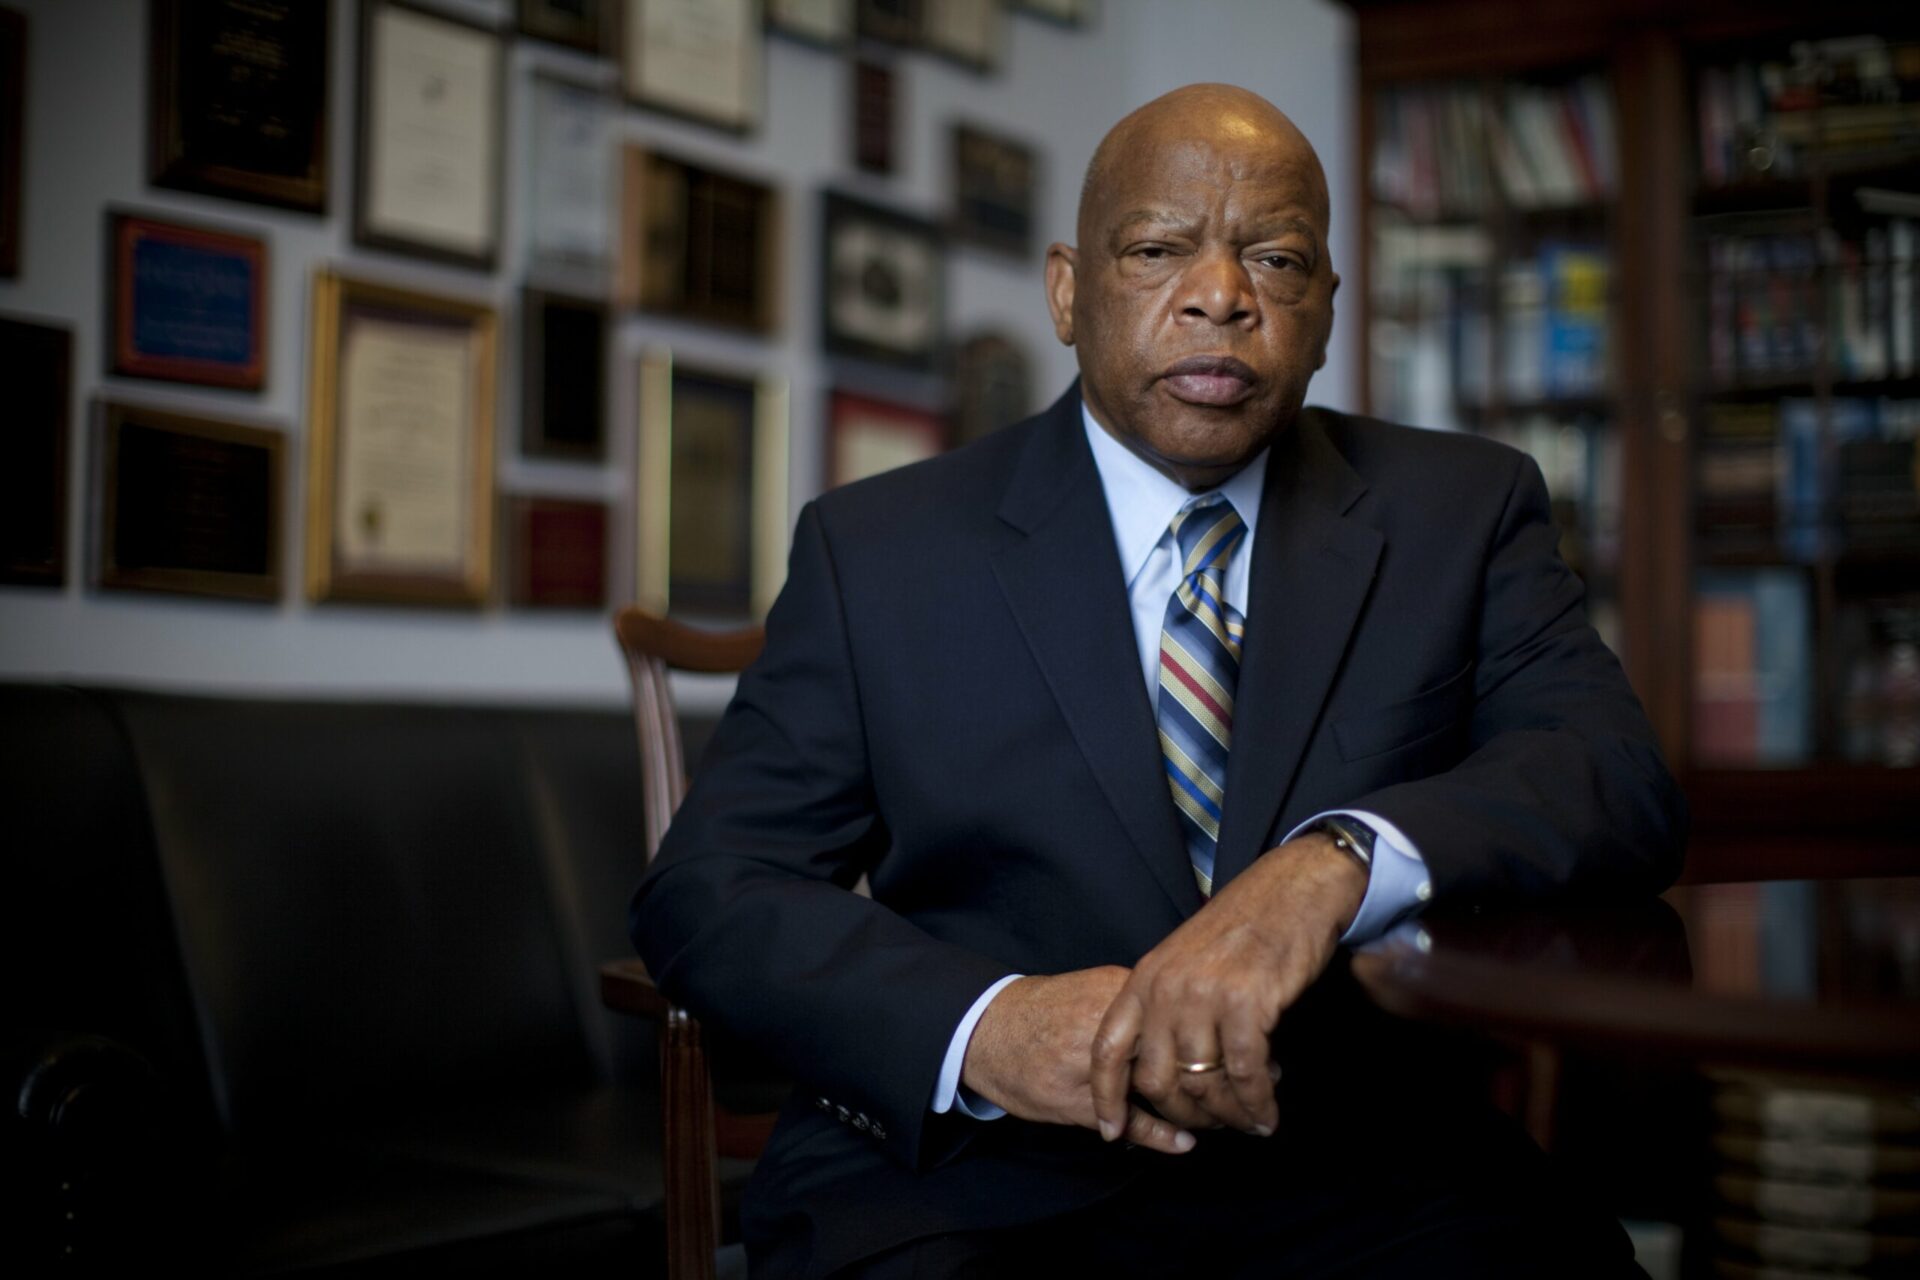 Voting, Democrats, John Lewis, Voting Rights Act